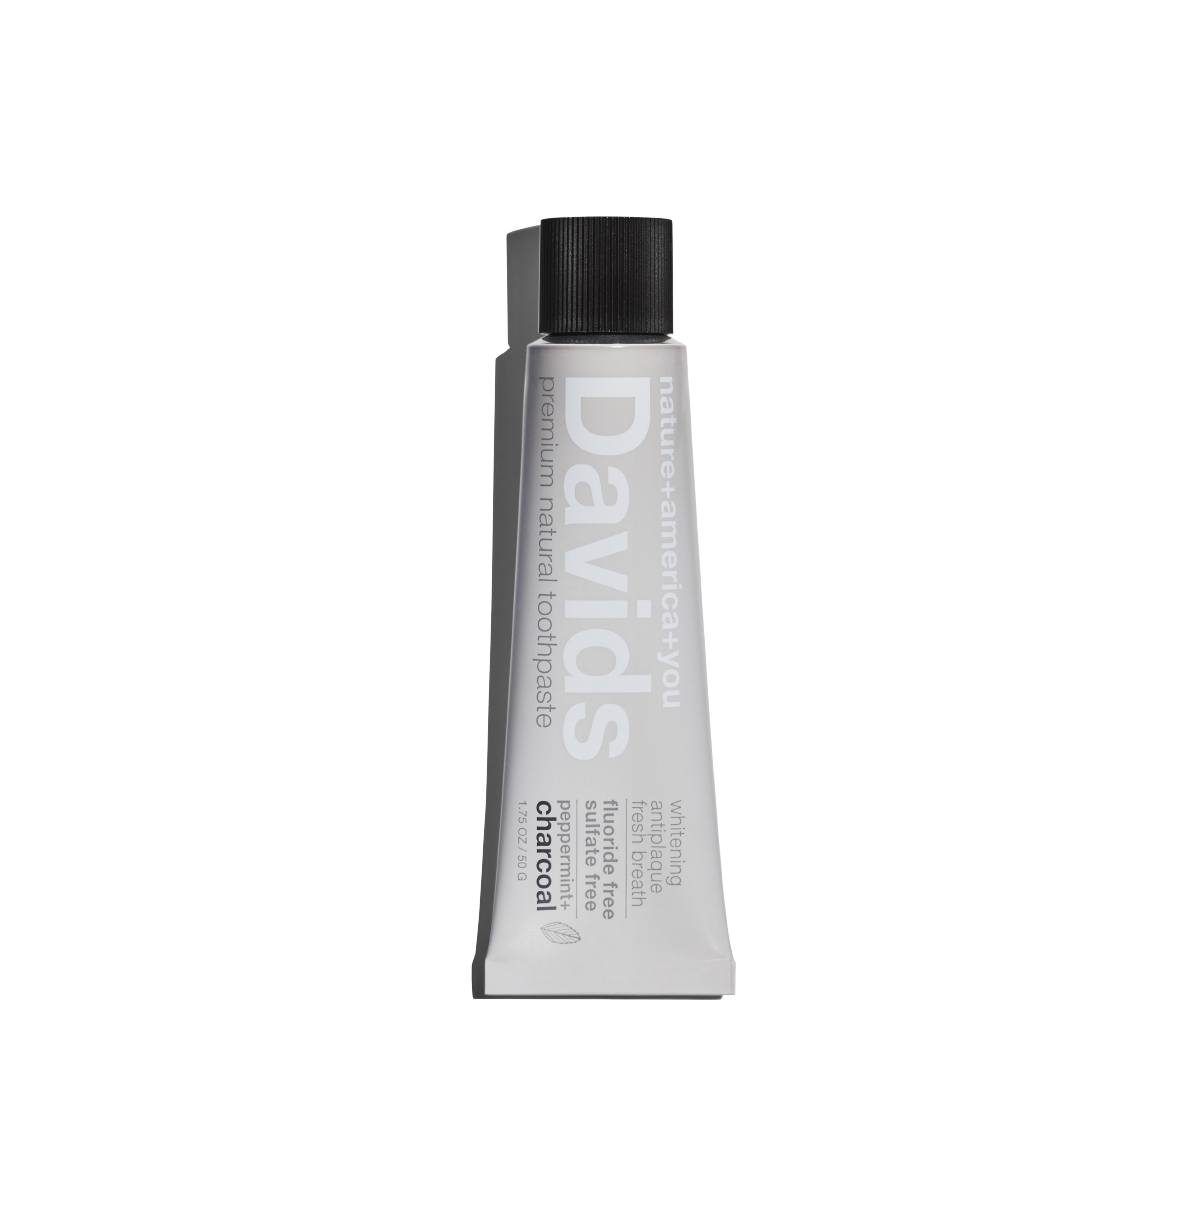 Davids Toothpaste | charcoal+peppermint travel size